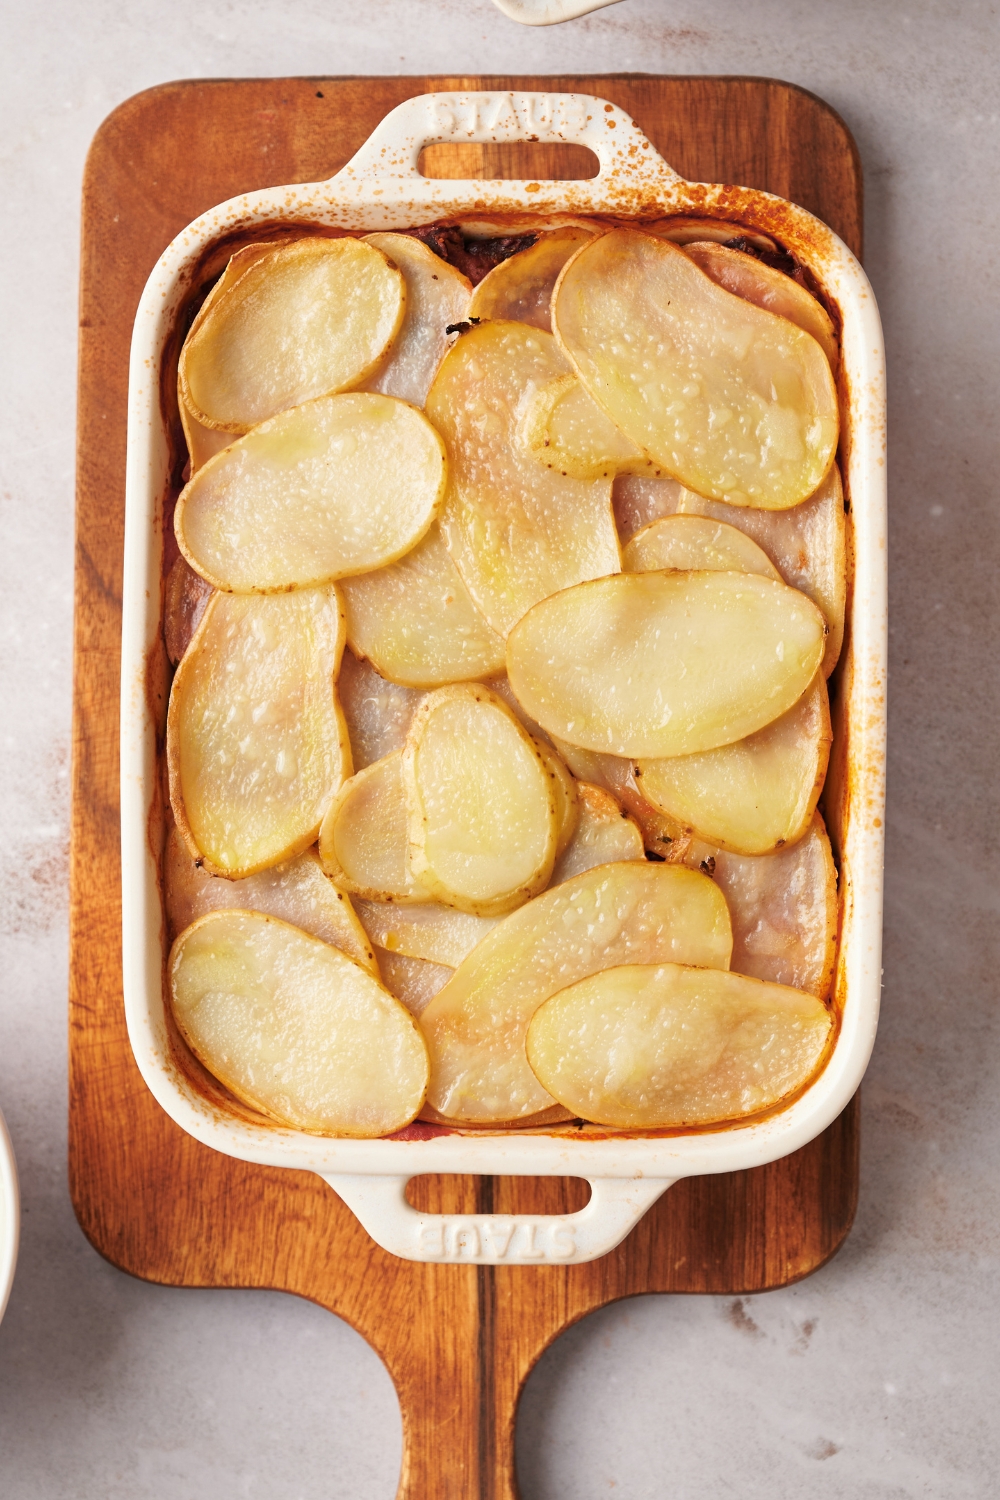 A casserole dish on a wooden serving board with baked shipwreck casserole without topping.